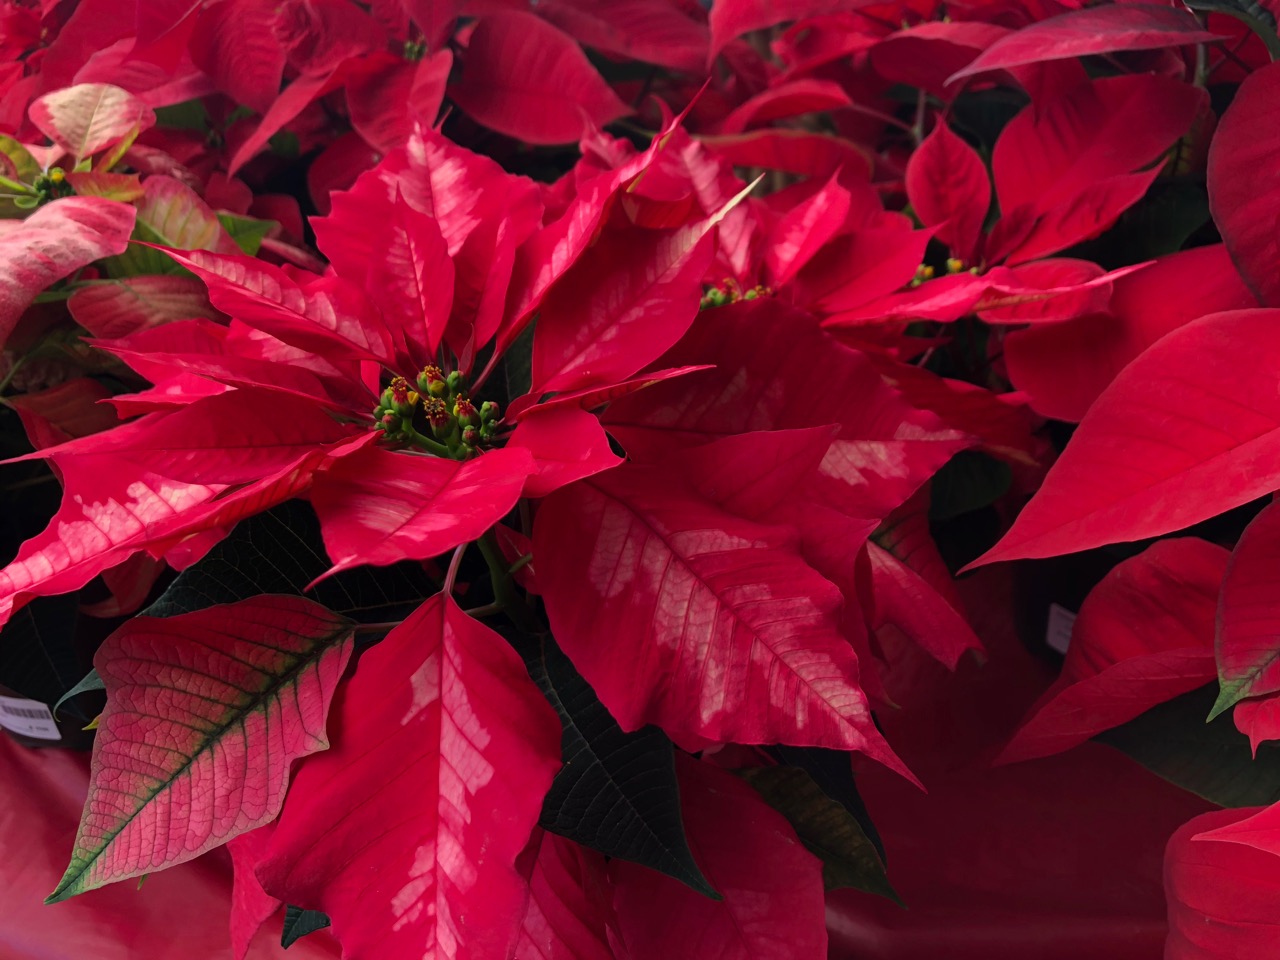 Poinsettias and Norfolk Pines